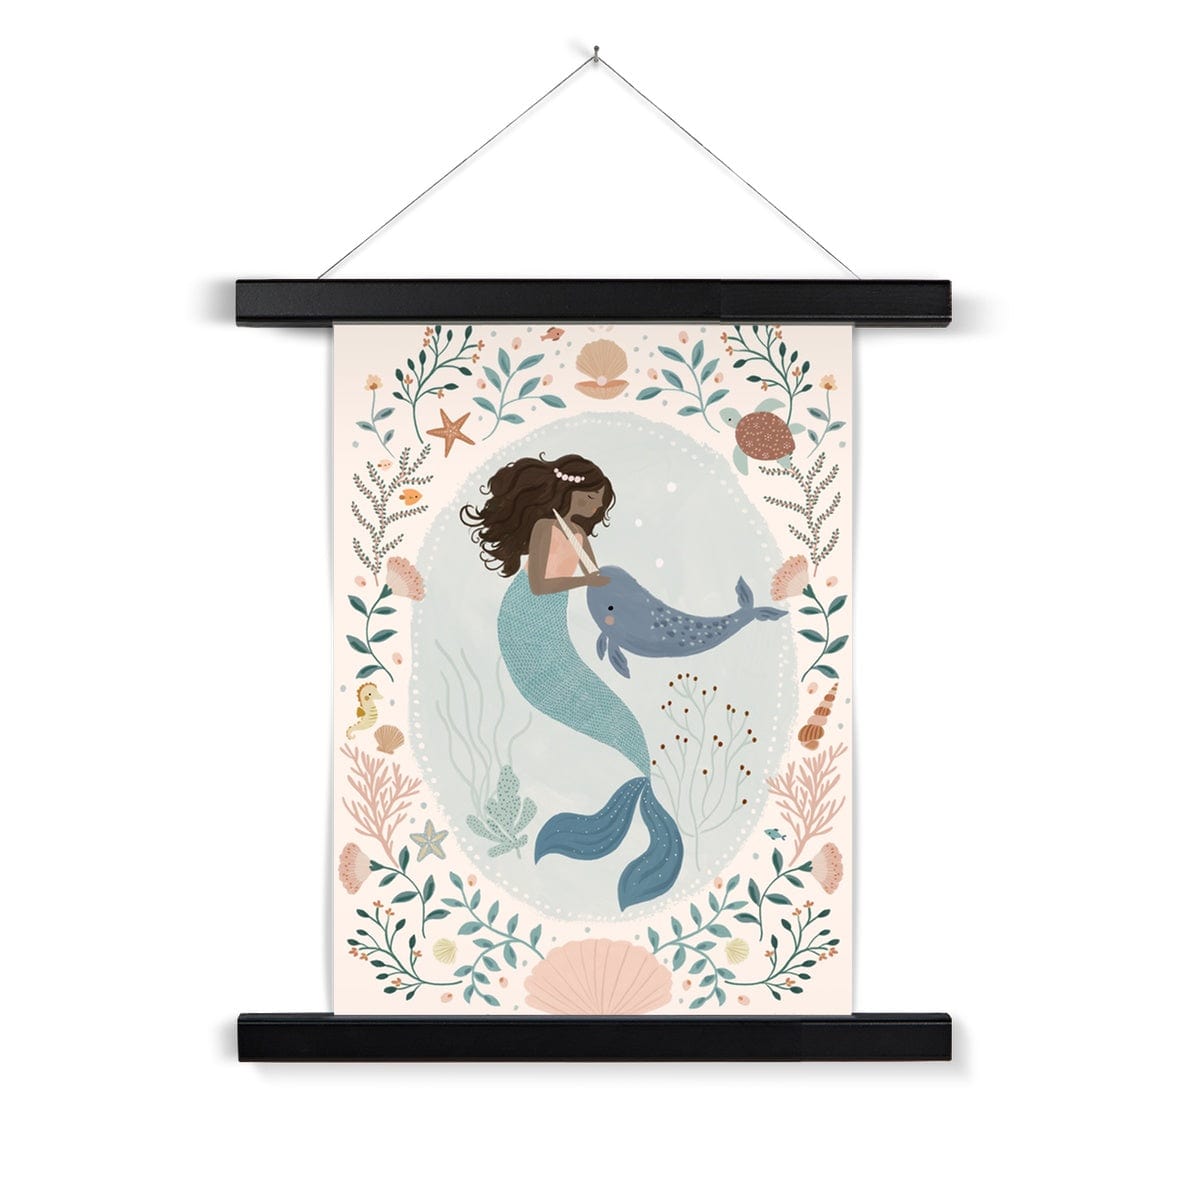 Beautiful dark skinned and haired mermaid with a pearl headband petting her friend Narwhal within a pale teal coloured oval background with white dots round the edge. On the outside of the oval is a sea themed border on a neutral background. The border consists of foliage, flowers and items you would find at the bottom of the sea, shells, turtle, sea horse with a large clam shell at the bottom, hanging from a nail in a black wooden hanger